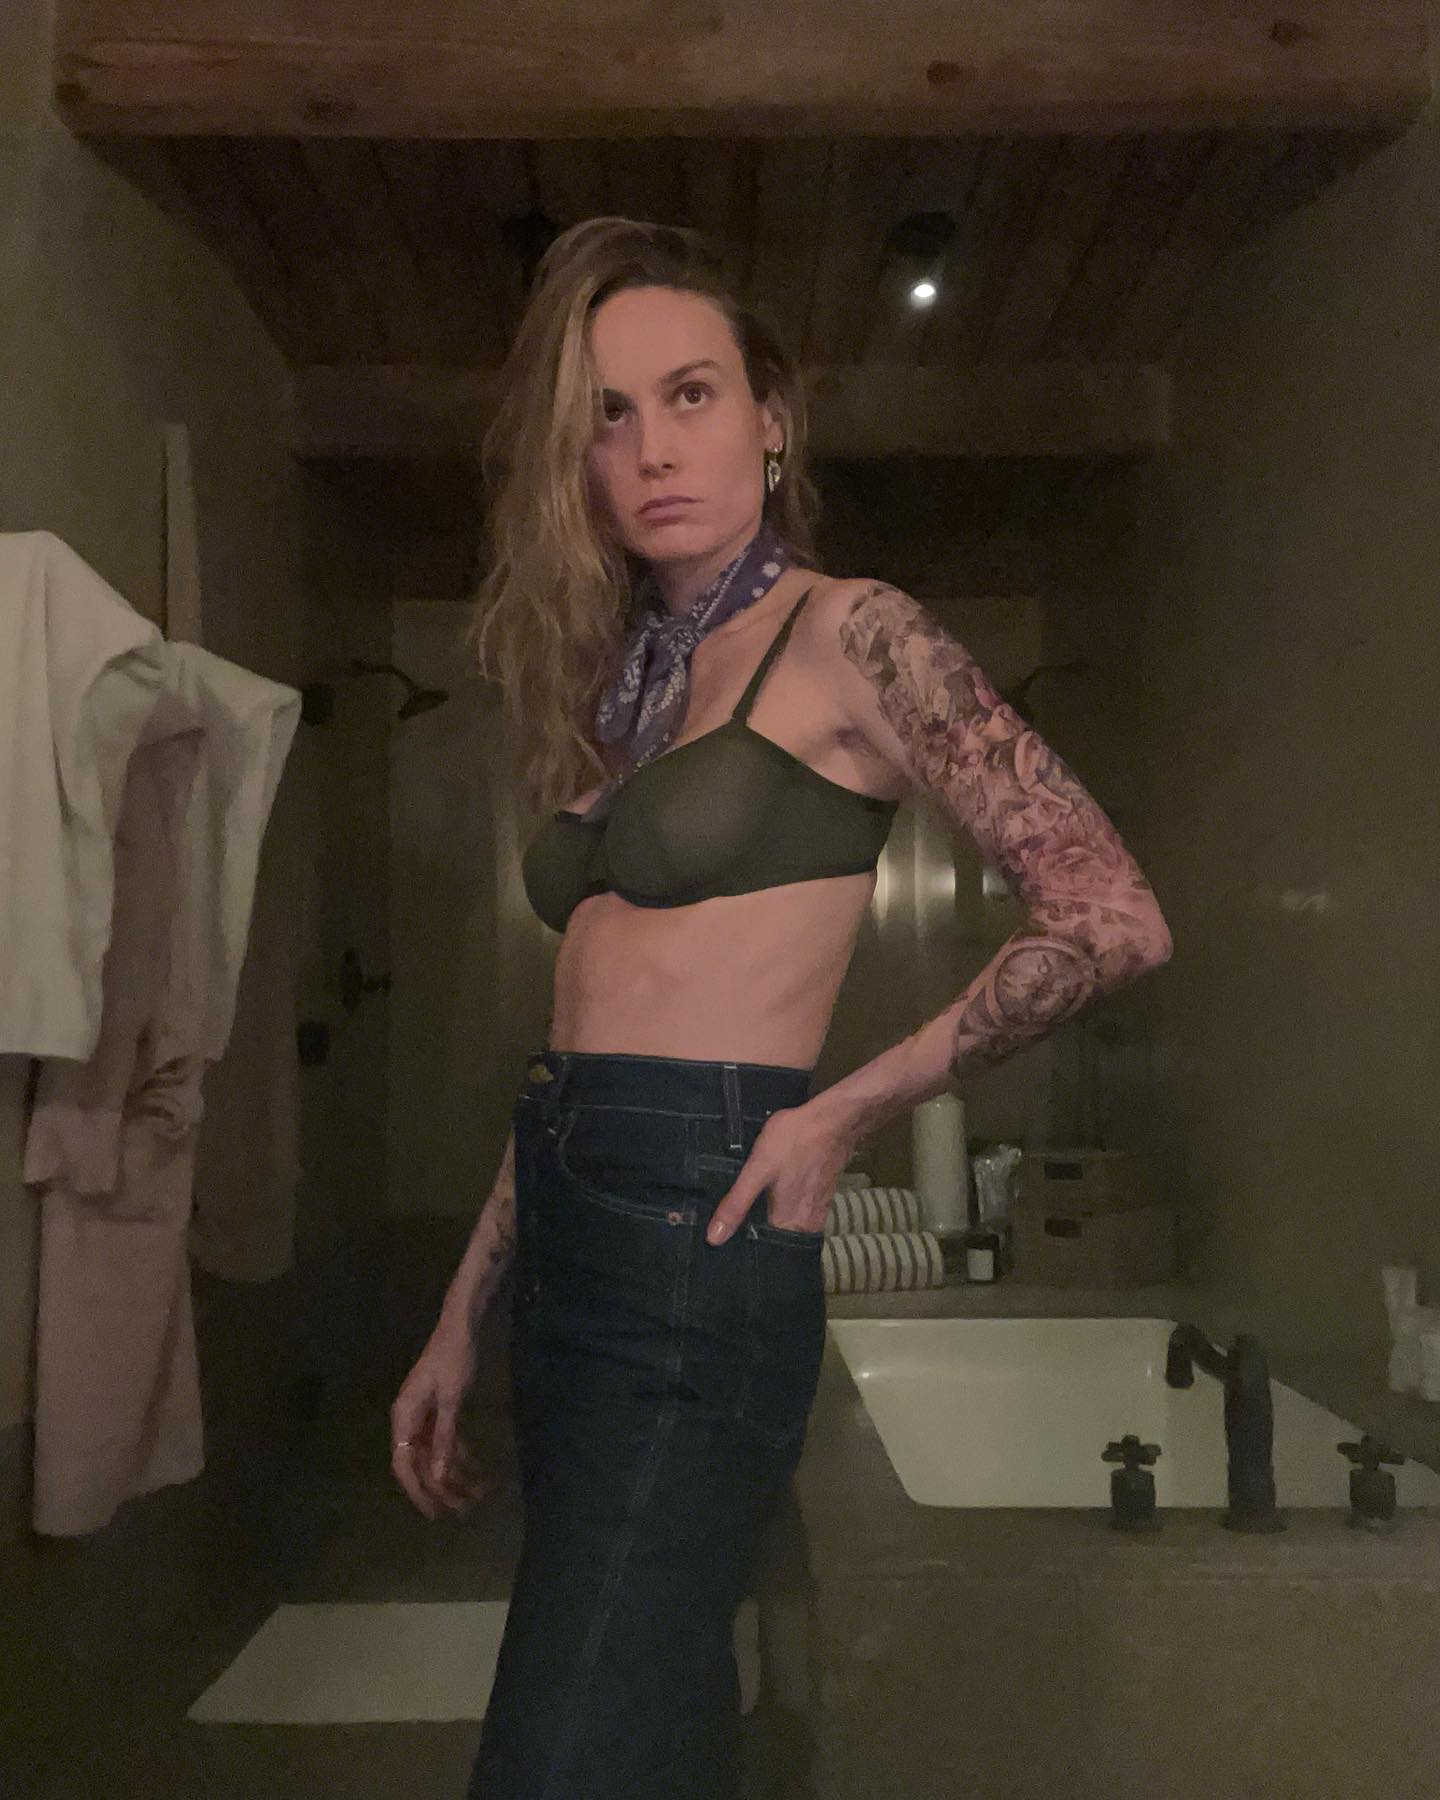 Photos n°1 : Brie Larson Shows Off Her Tattoos in a Bra!